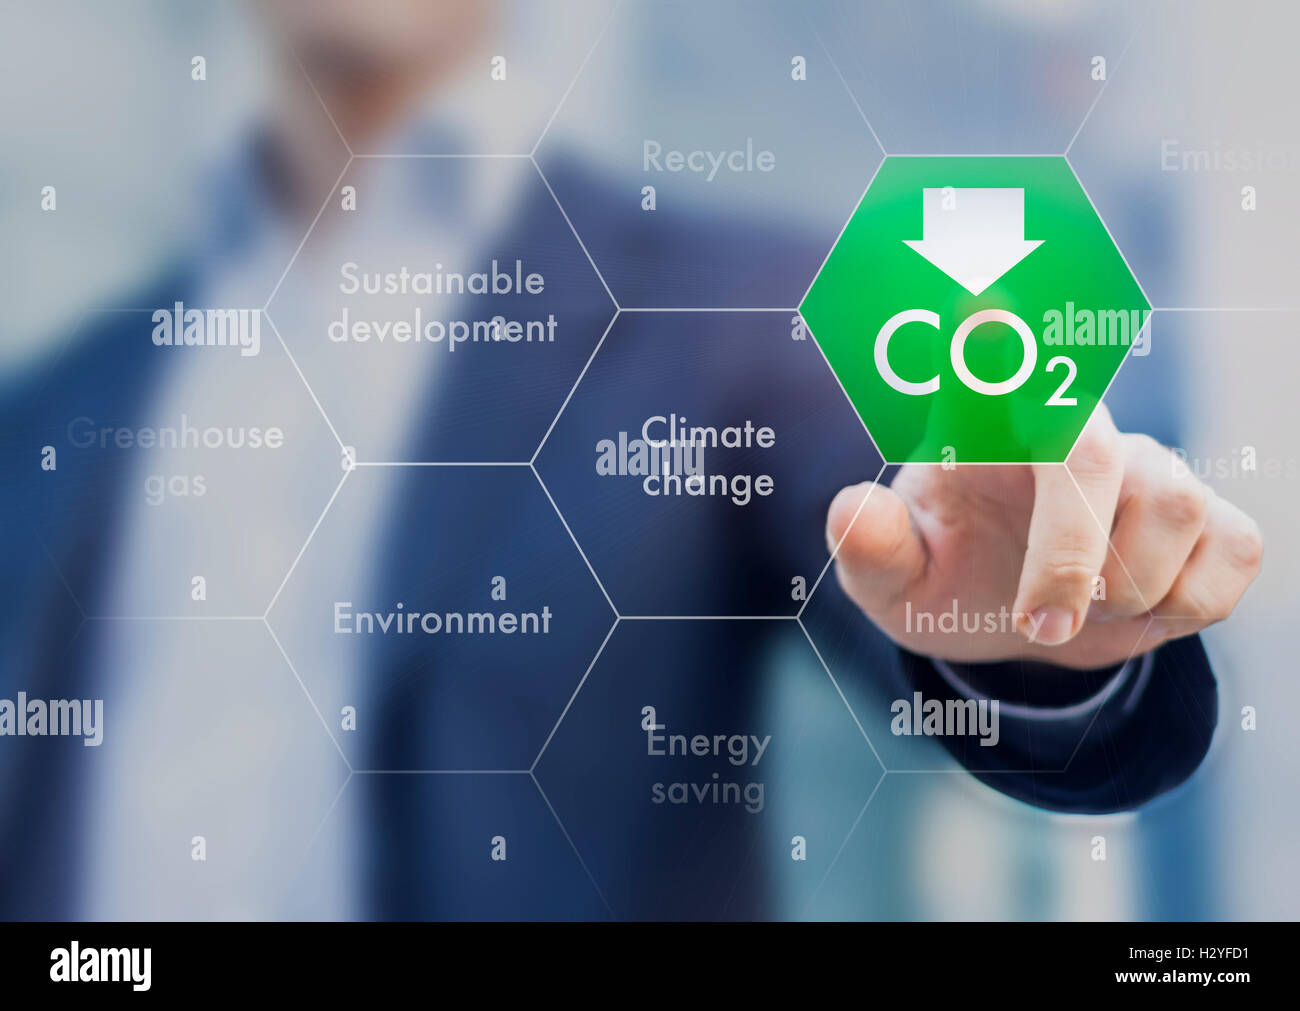 Reduce greenhouse gas emission for climate change and sustainable development Stock Photo